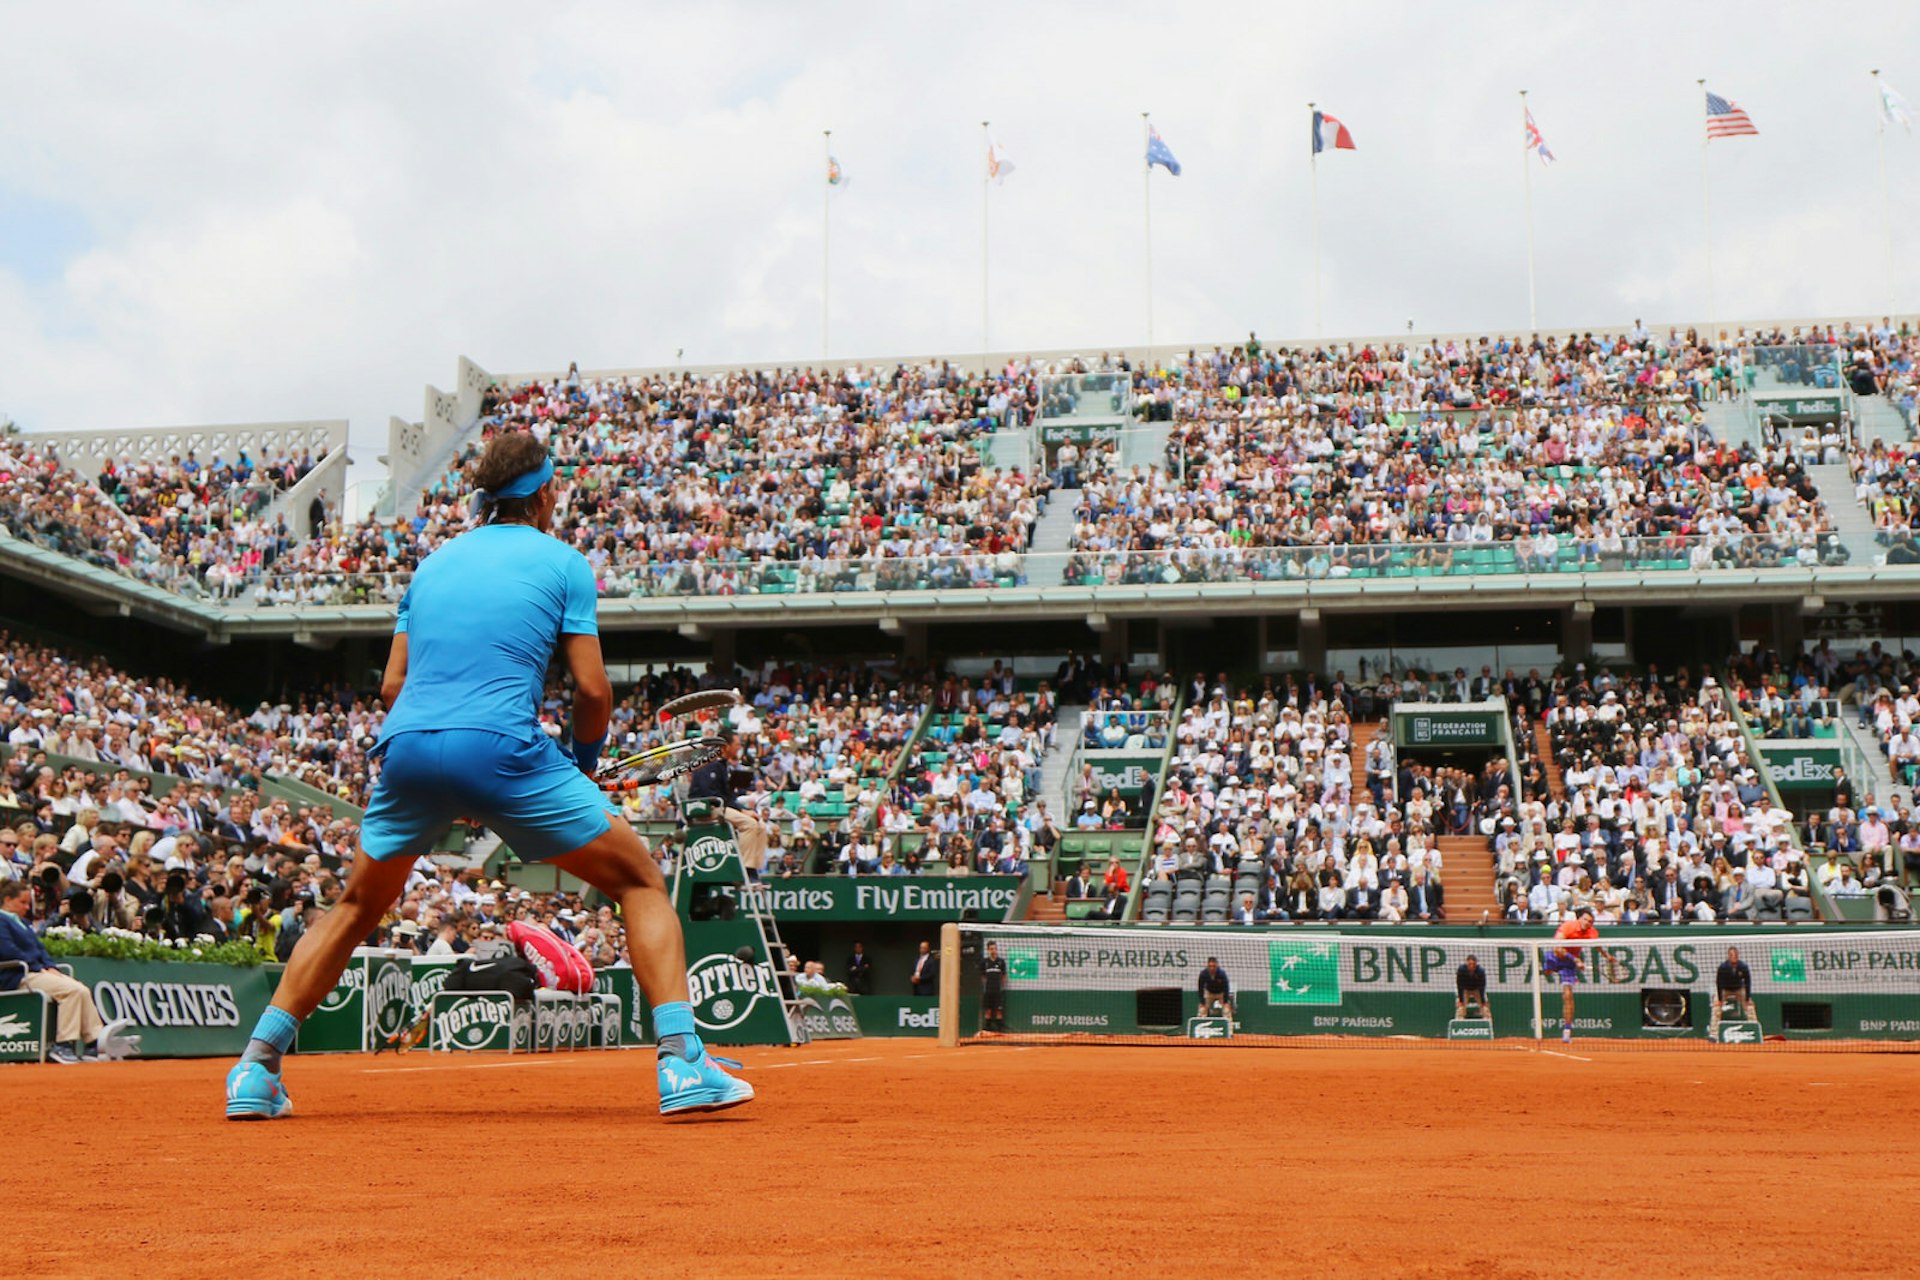 Rafael Nadal, clad in bright blue and crouched in anticipation, awaits a ball served from his opponent across the net; the image is shot from ground level looking up towards Nadal from the back and across to the stands beyond